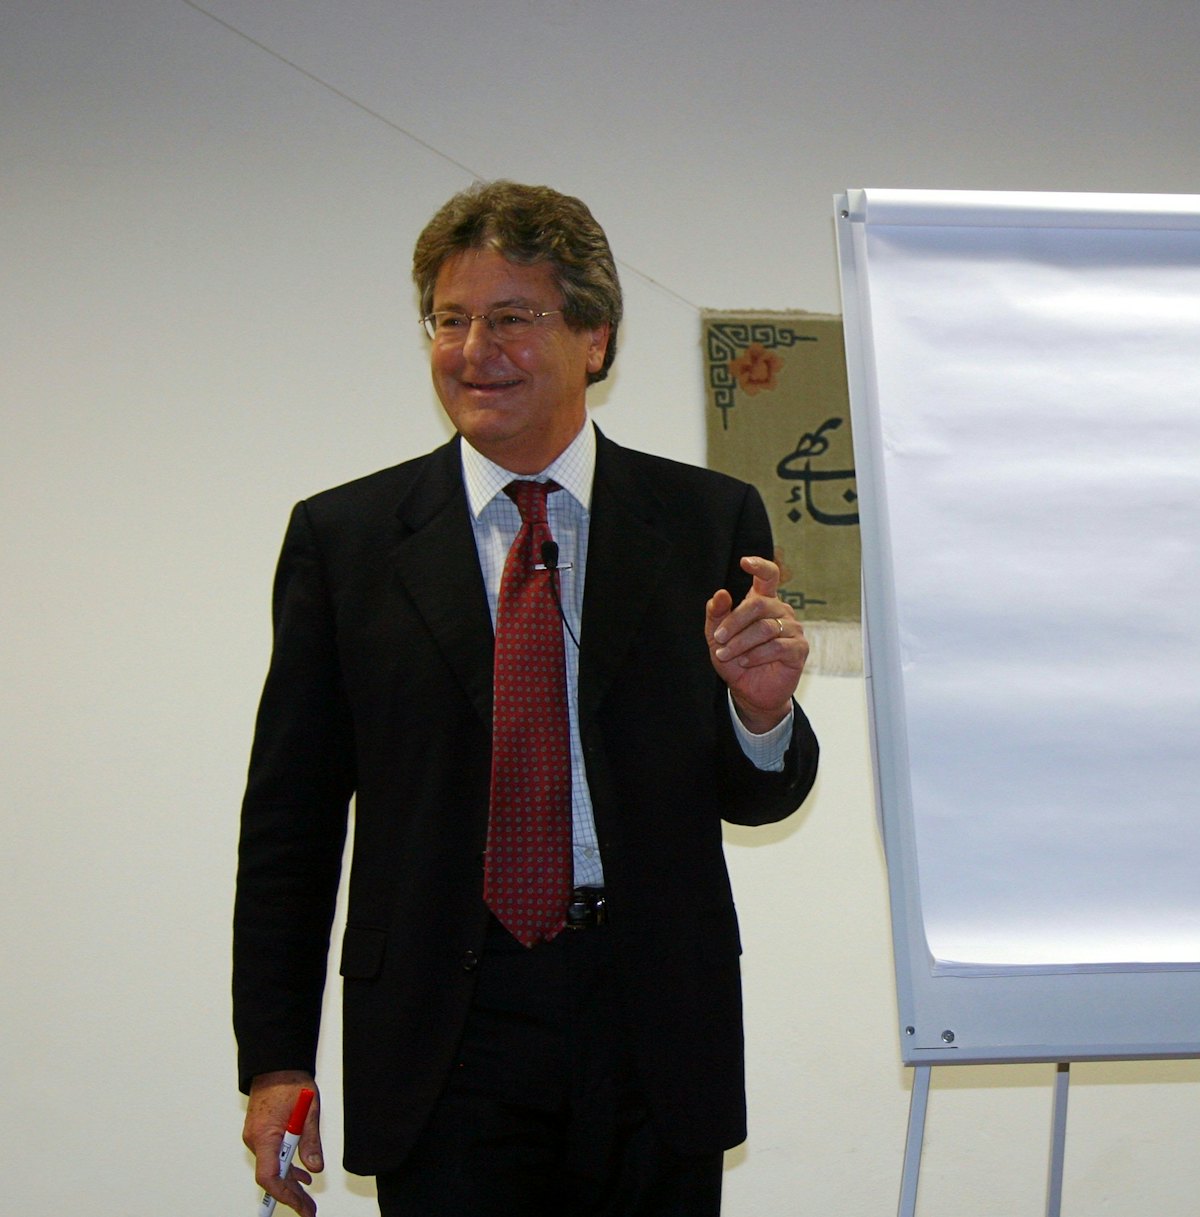 One of the speakers at the Changing Times seminar, Giuseppe Robiati (Italy).